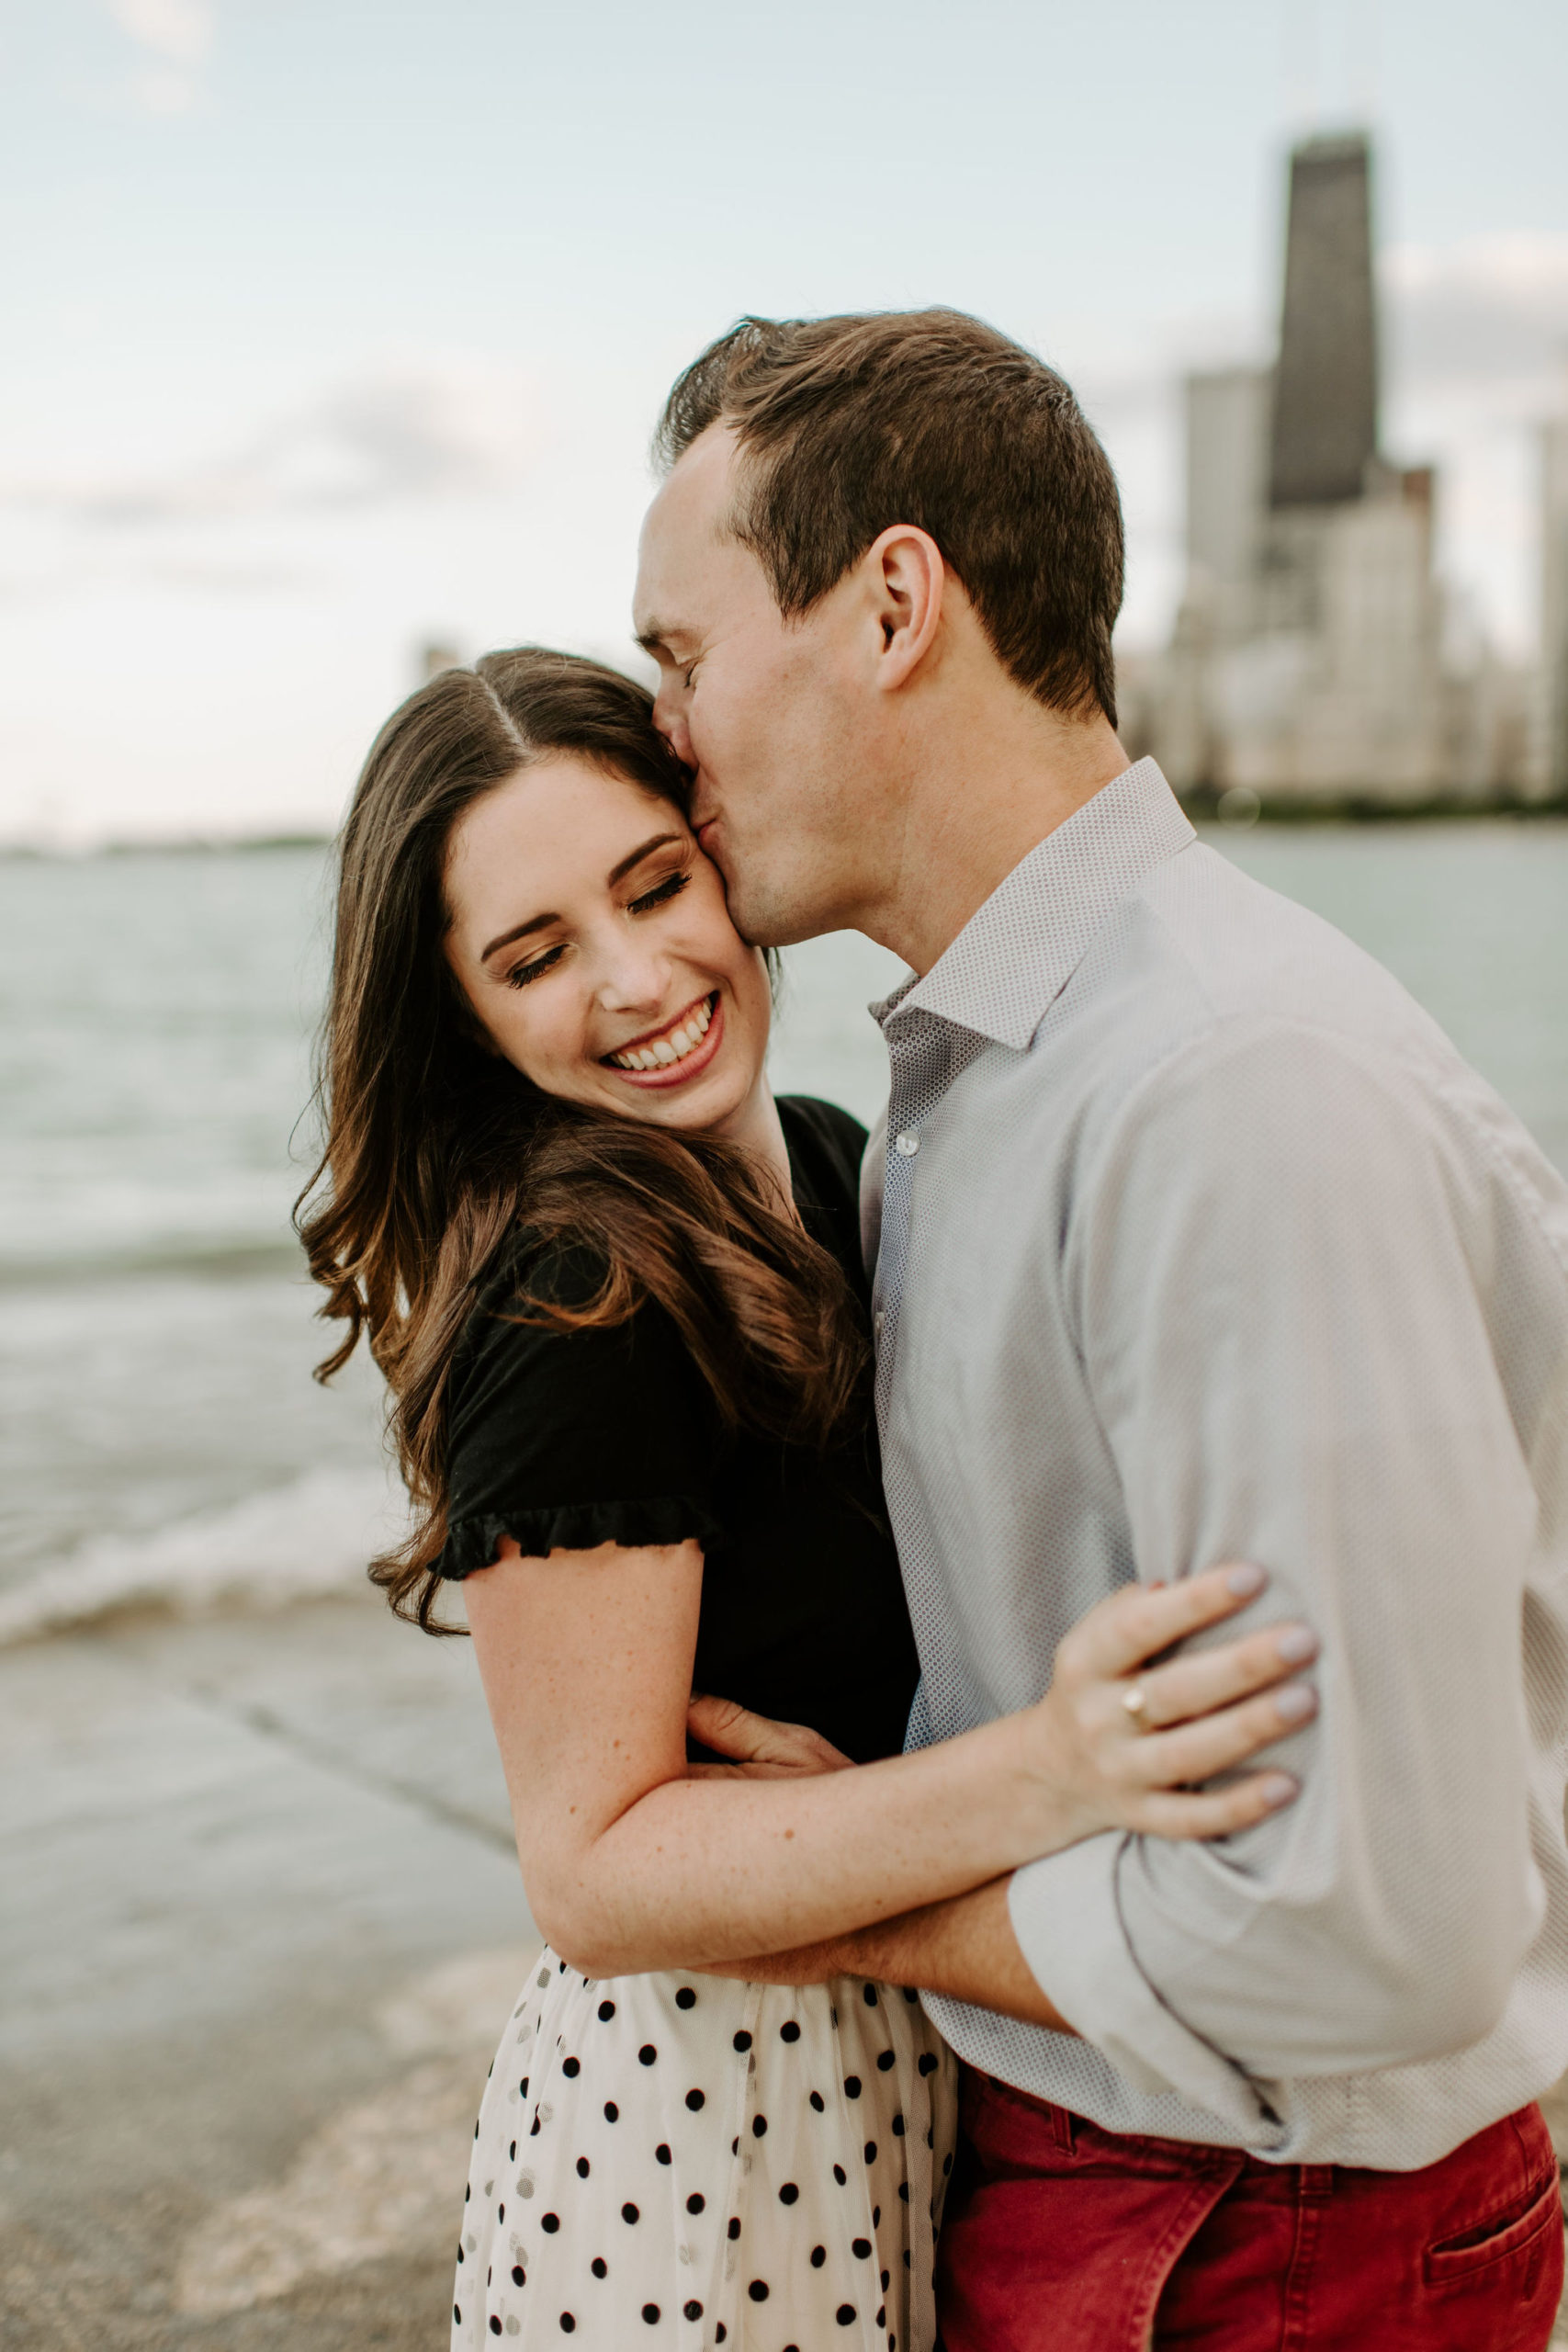 North Avenue Beach Engagement Session by Photographs by Teresa. Includes posing inspiration for an outdoor couples session. Book your couples session and browse the blog for more inspiration